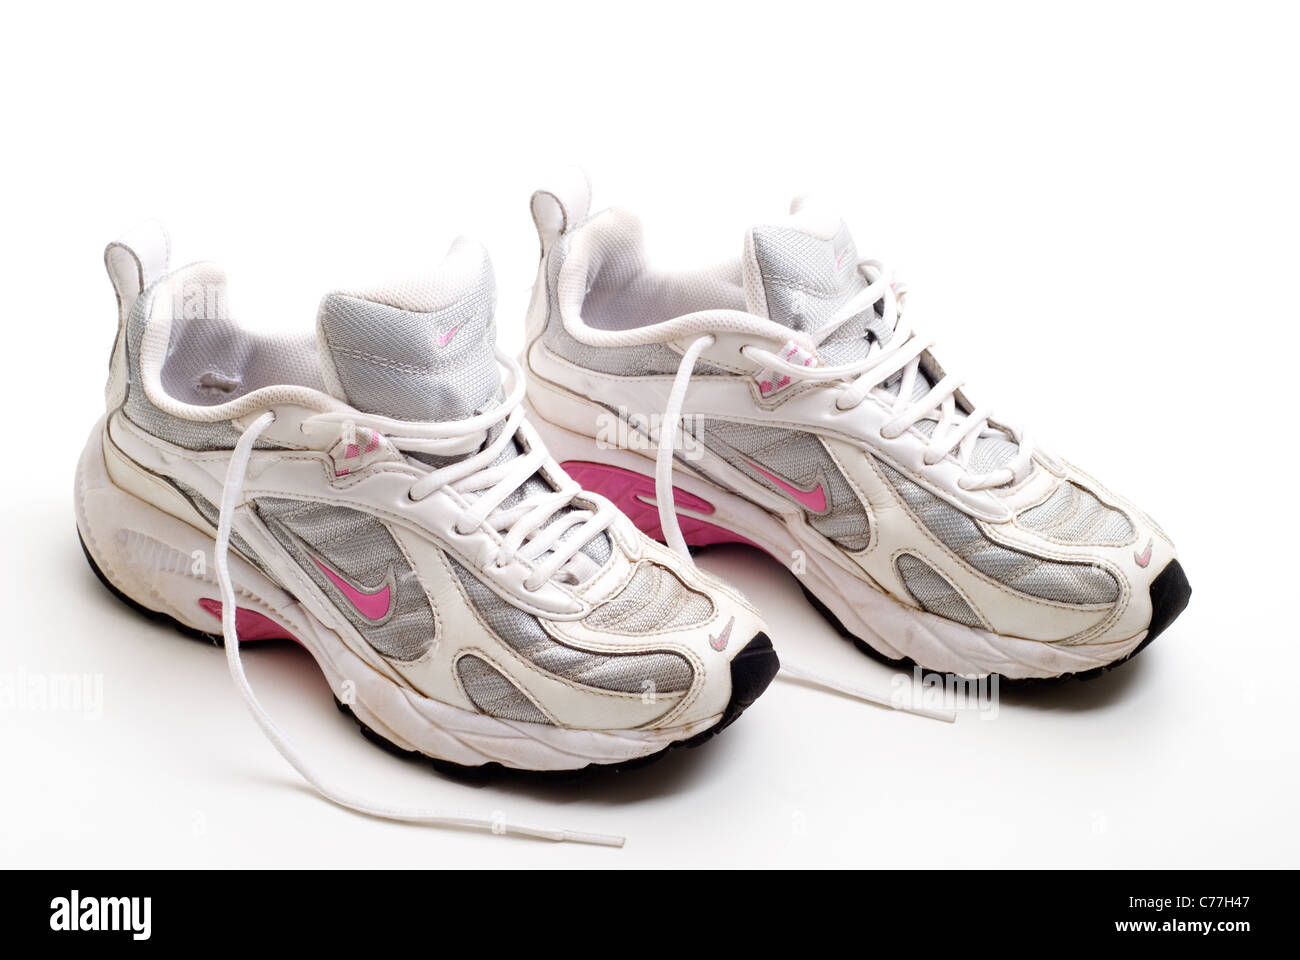 Old used Pair of Nike running shoes cut out Stock Photo - Alamy